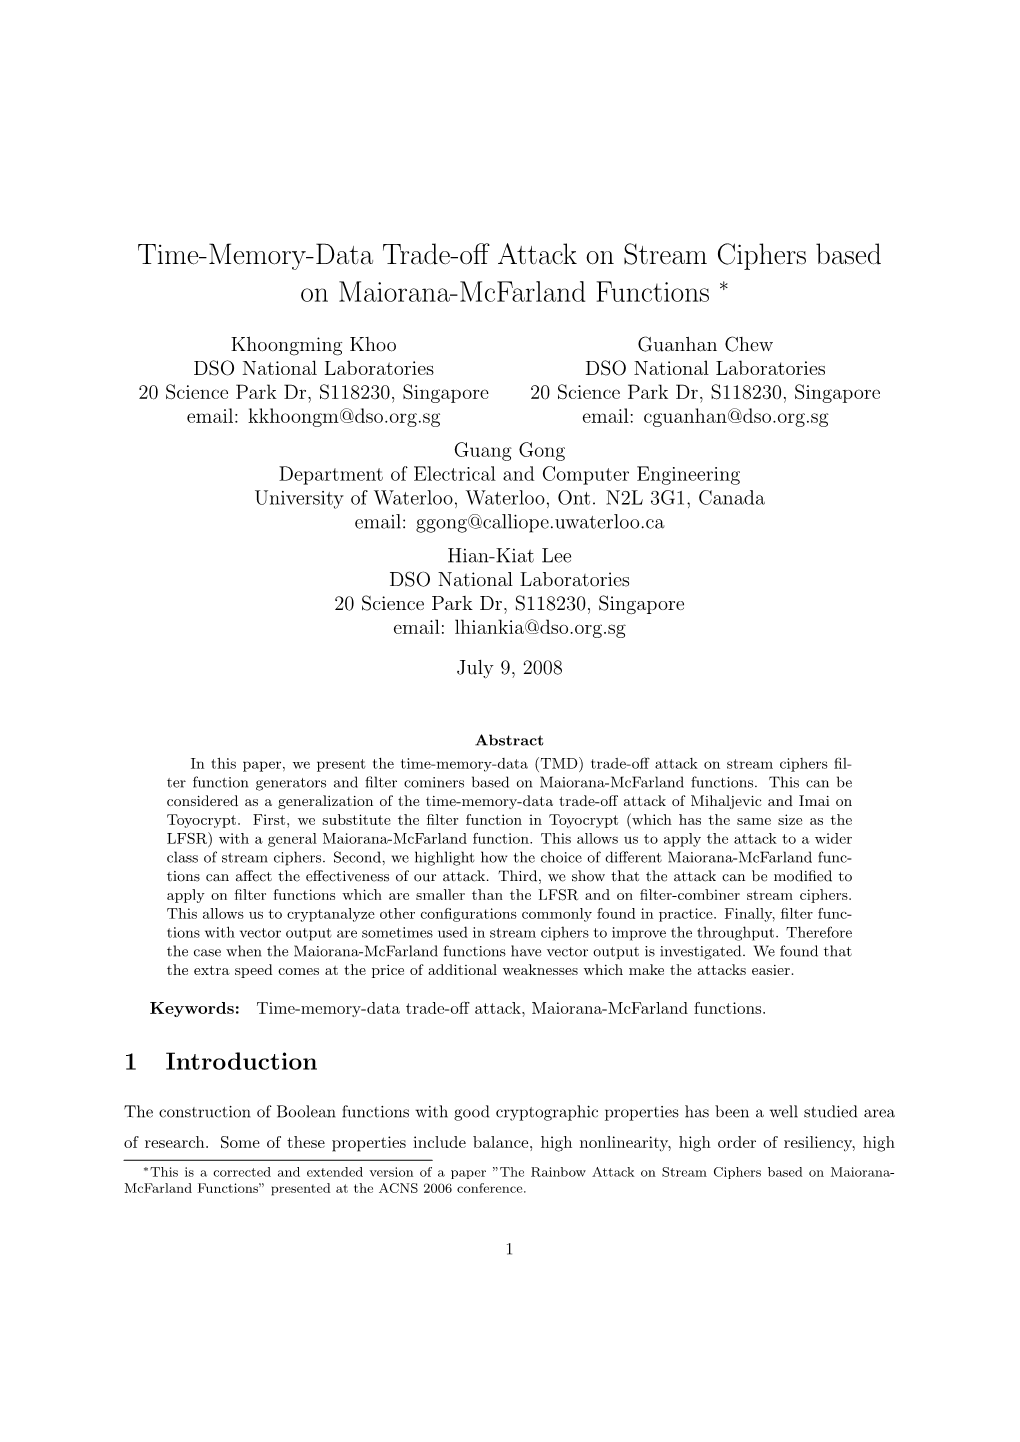 Time-Memory-Data Trade-Off Attack on Stream Ciphers Based On